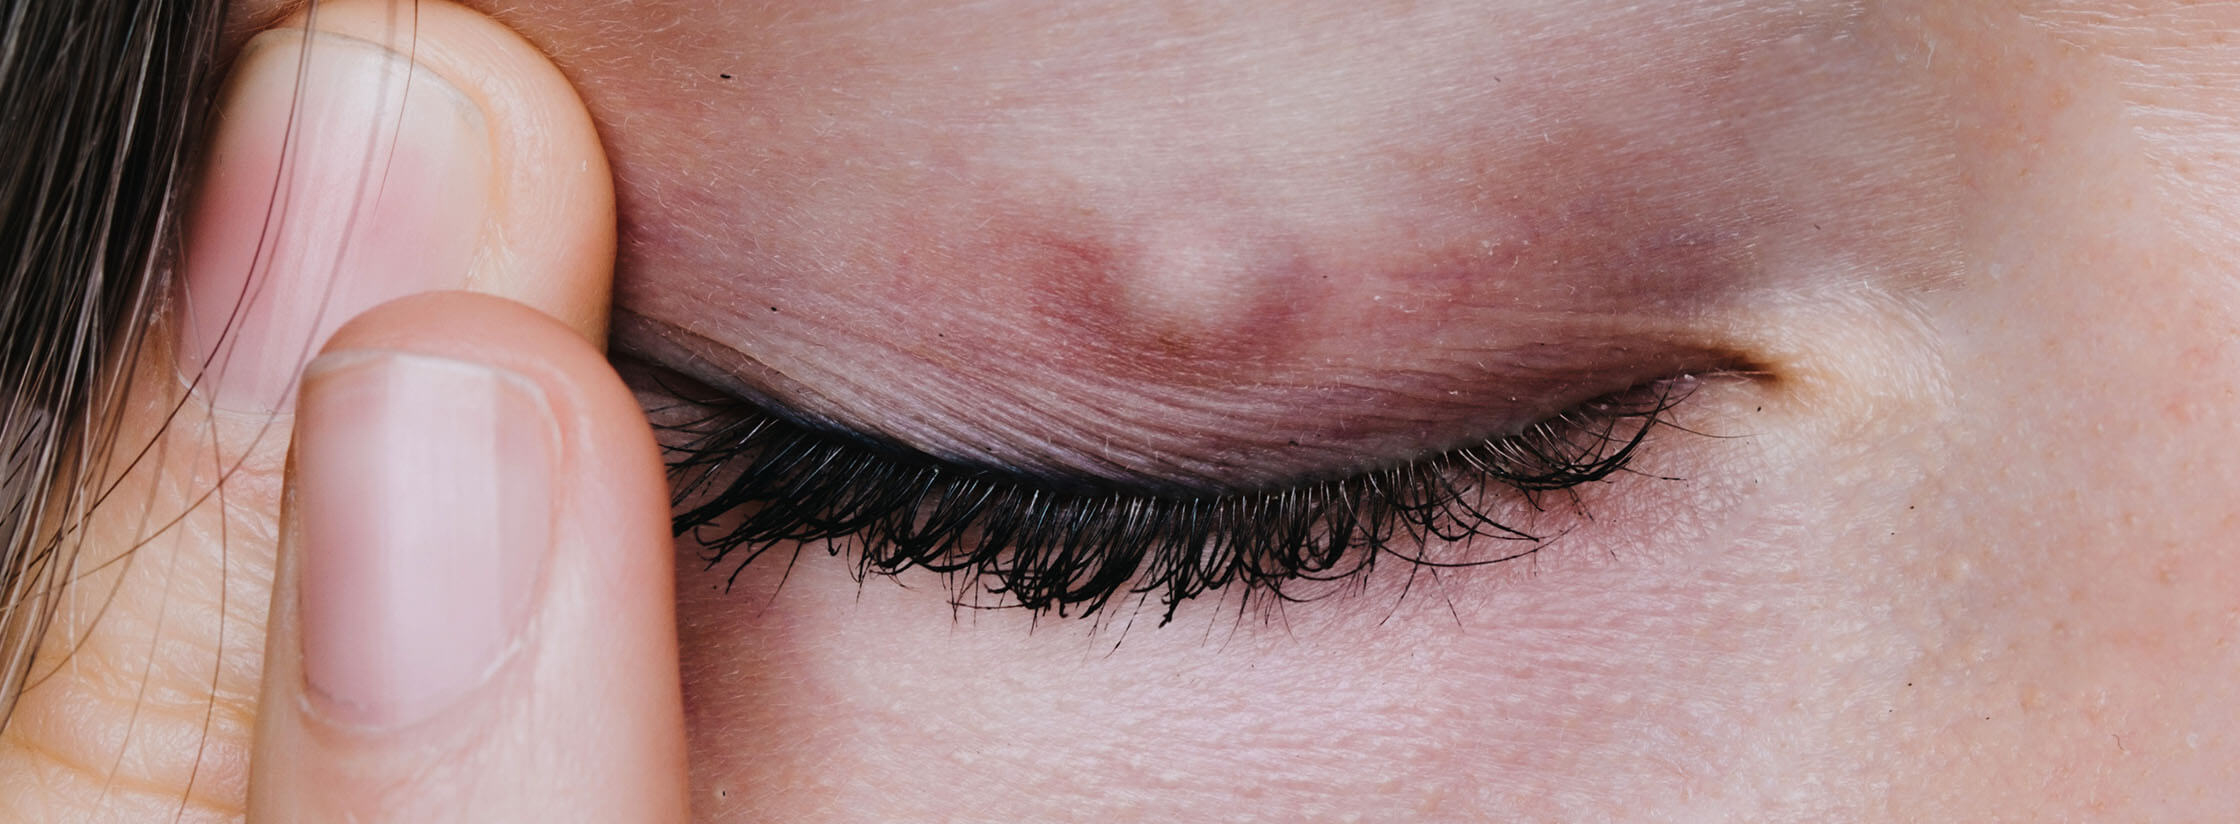 A woman with a chalazion on her eyelid